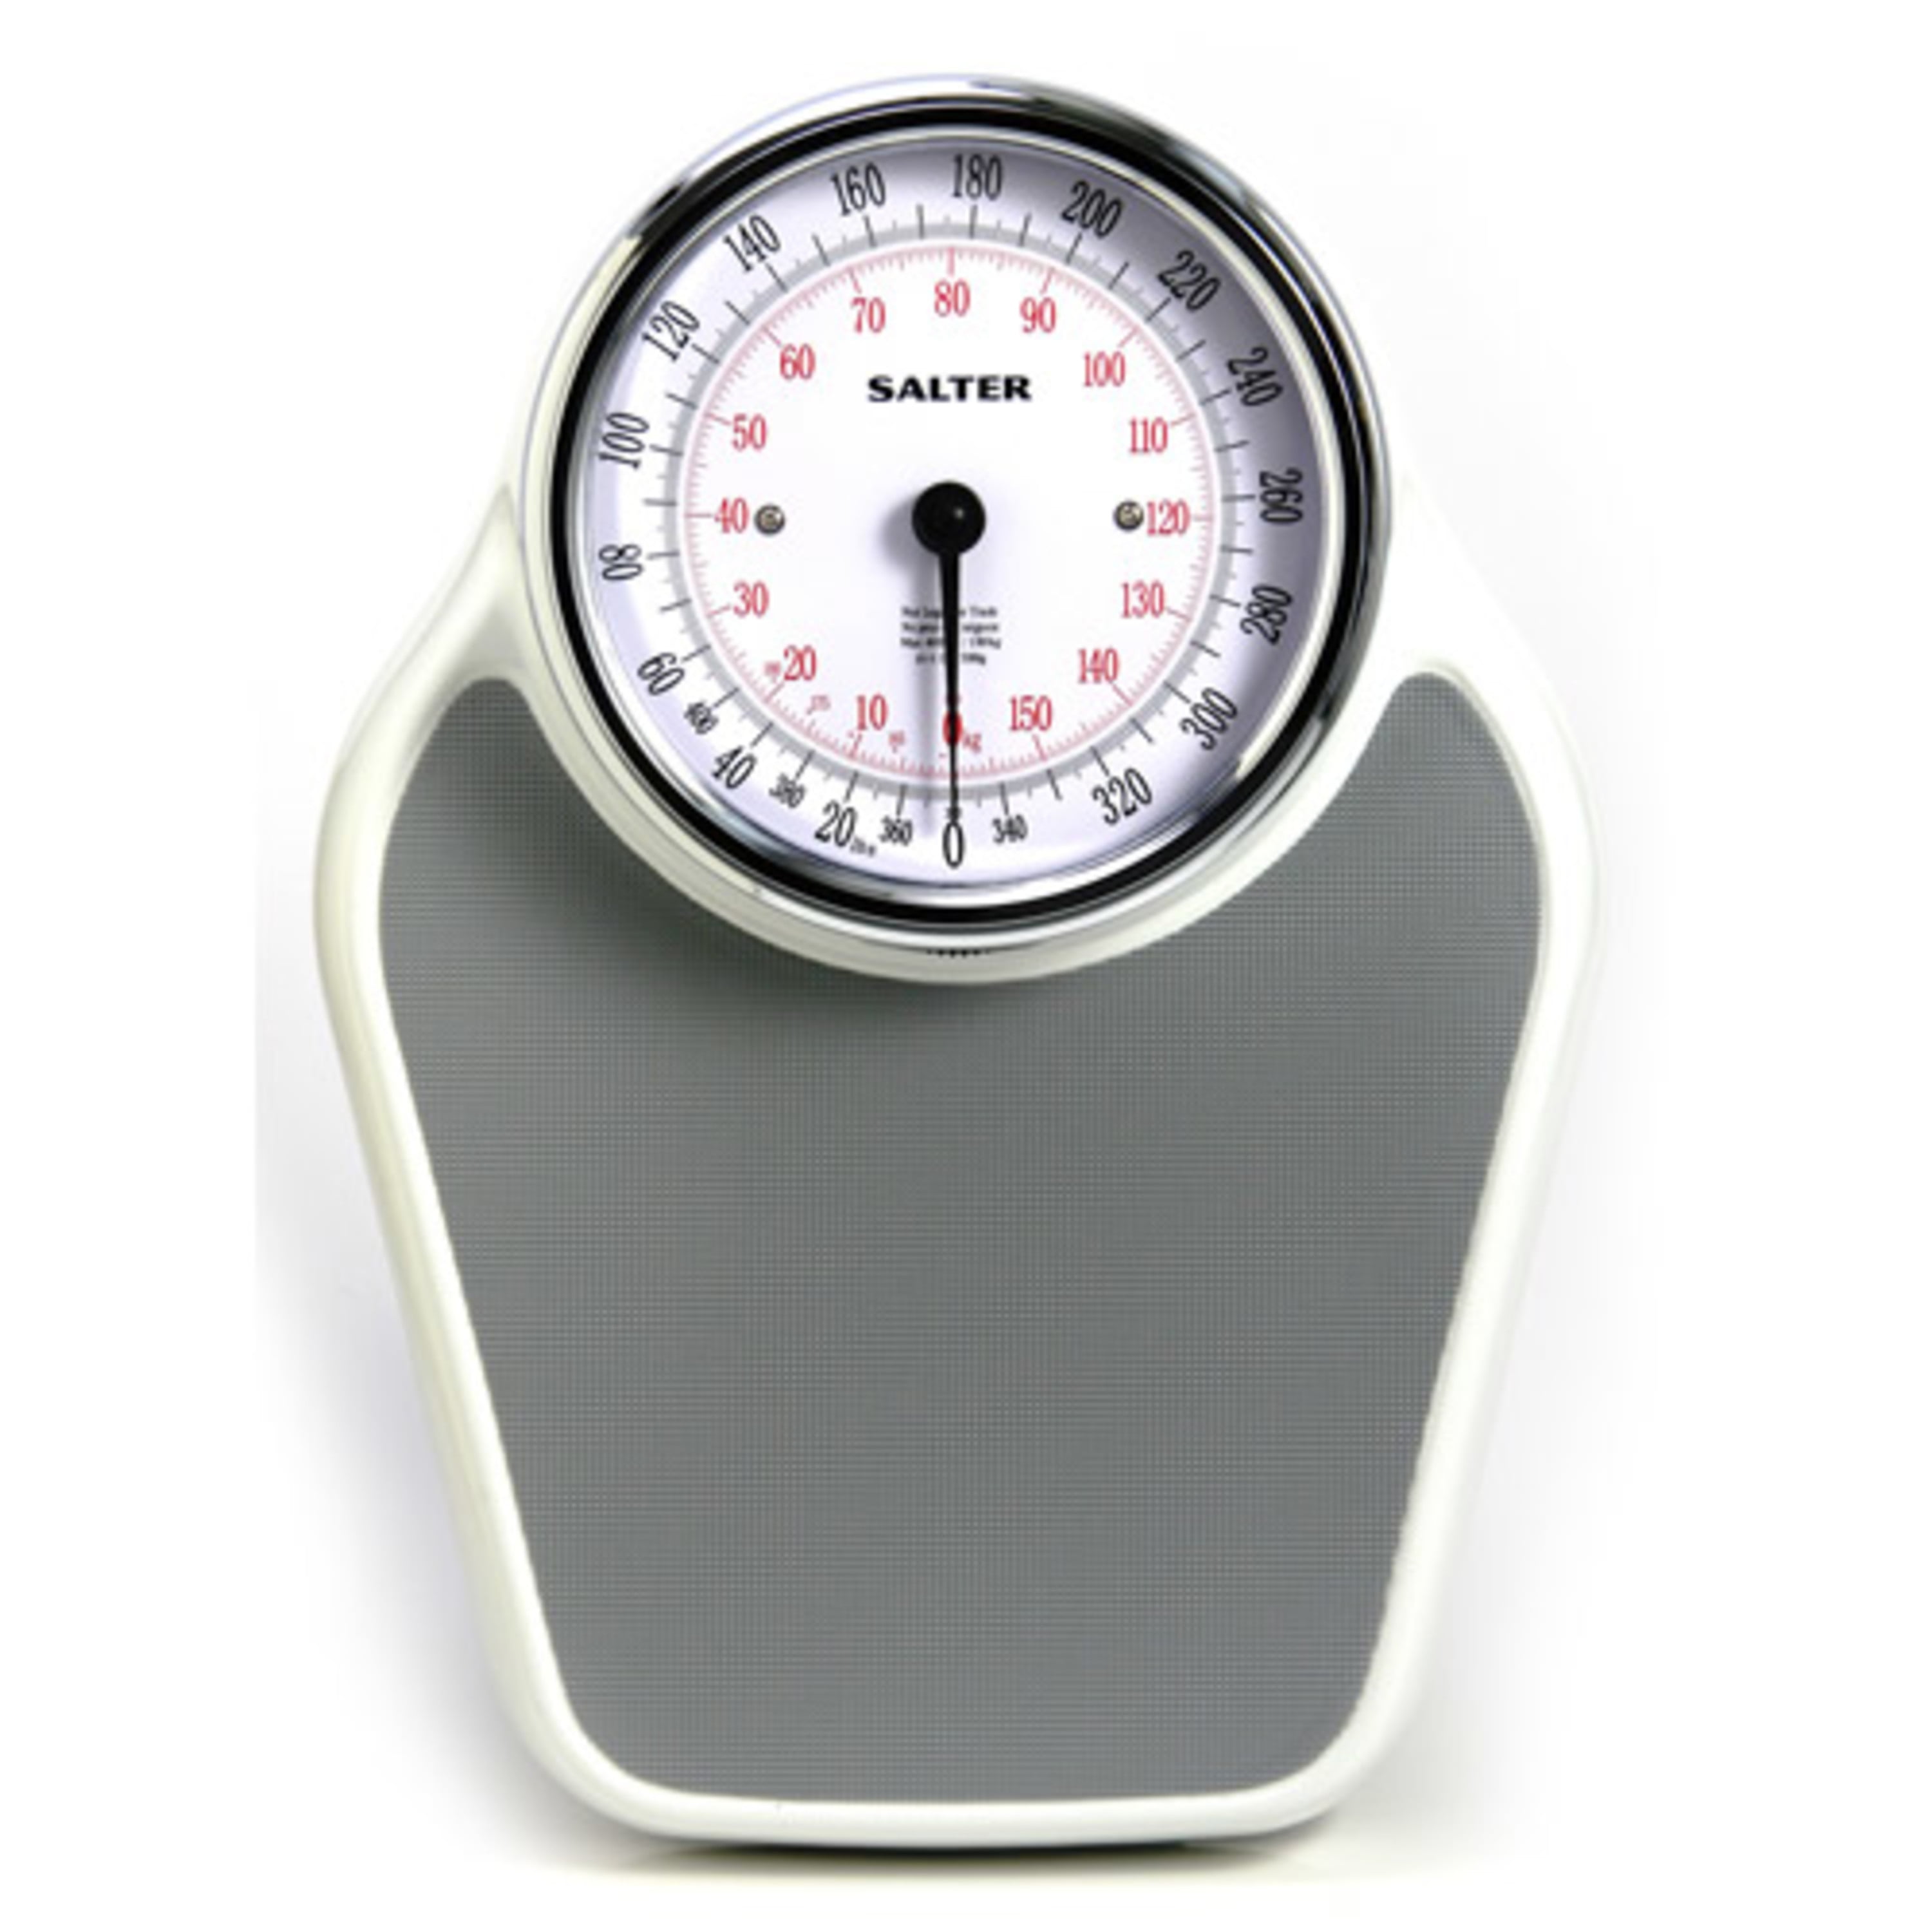 Bathroom Scales Sturdy Metal Body Large Dial Design Heavy Duty Weighing Capacity 331lbs Black Mechanical Scale 